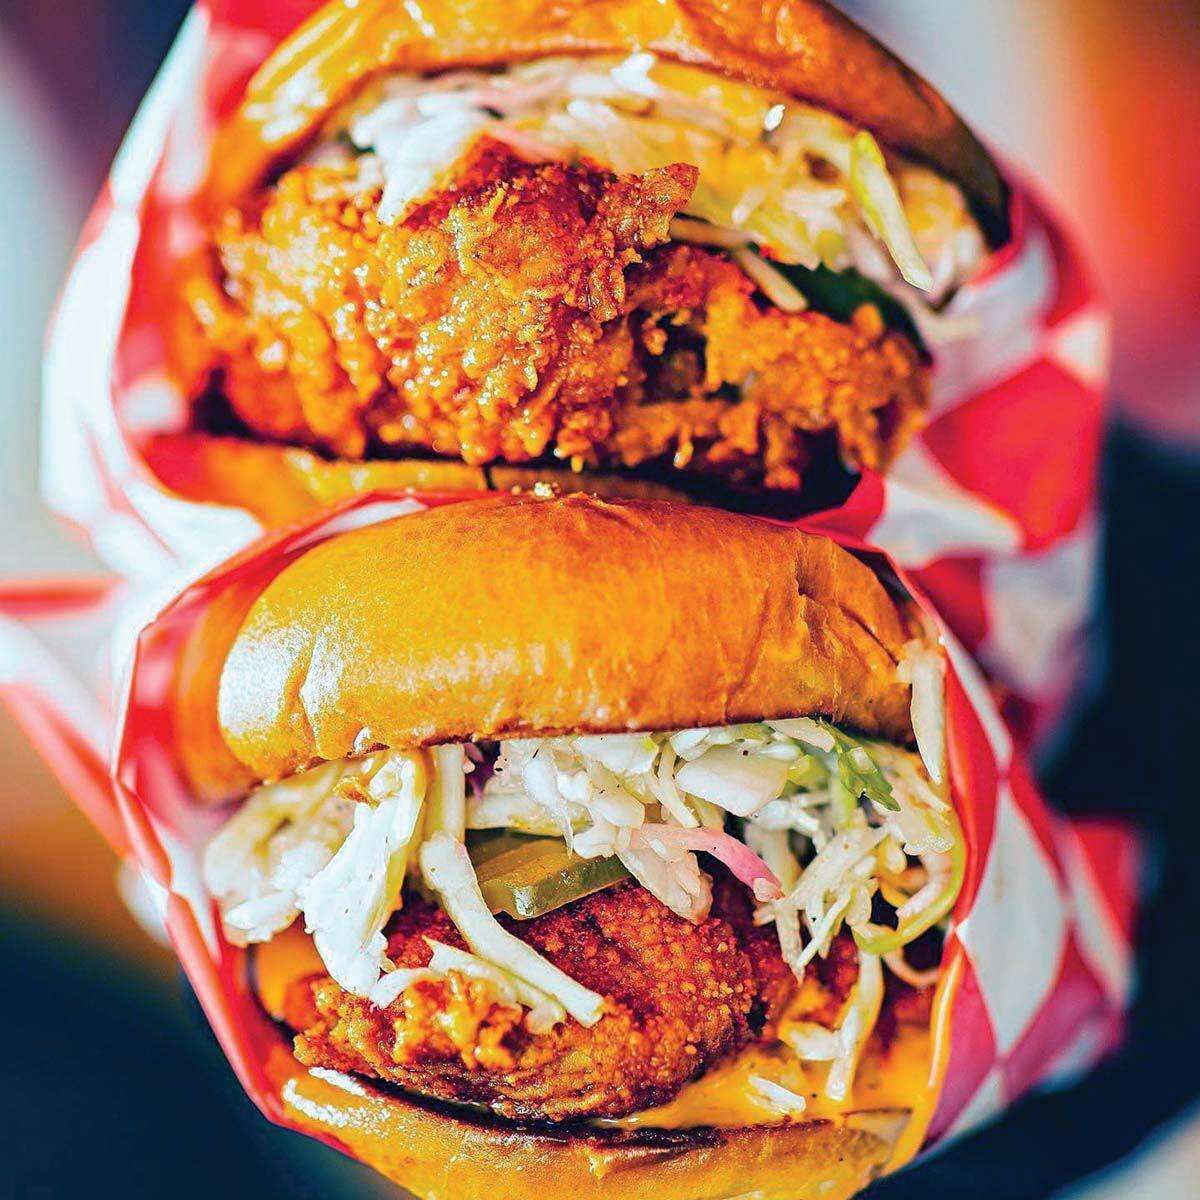 Birdcode's "sandos," with boneless breast meat, are built on brioche buns topped with vinegar slaw, pickles and mayonnaise-based "comeback sauce."